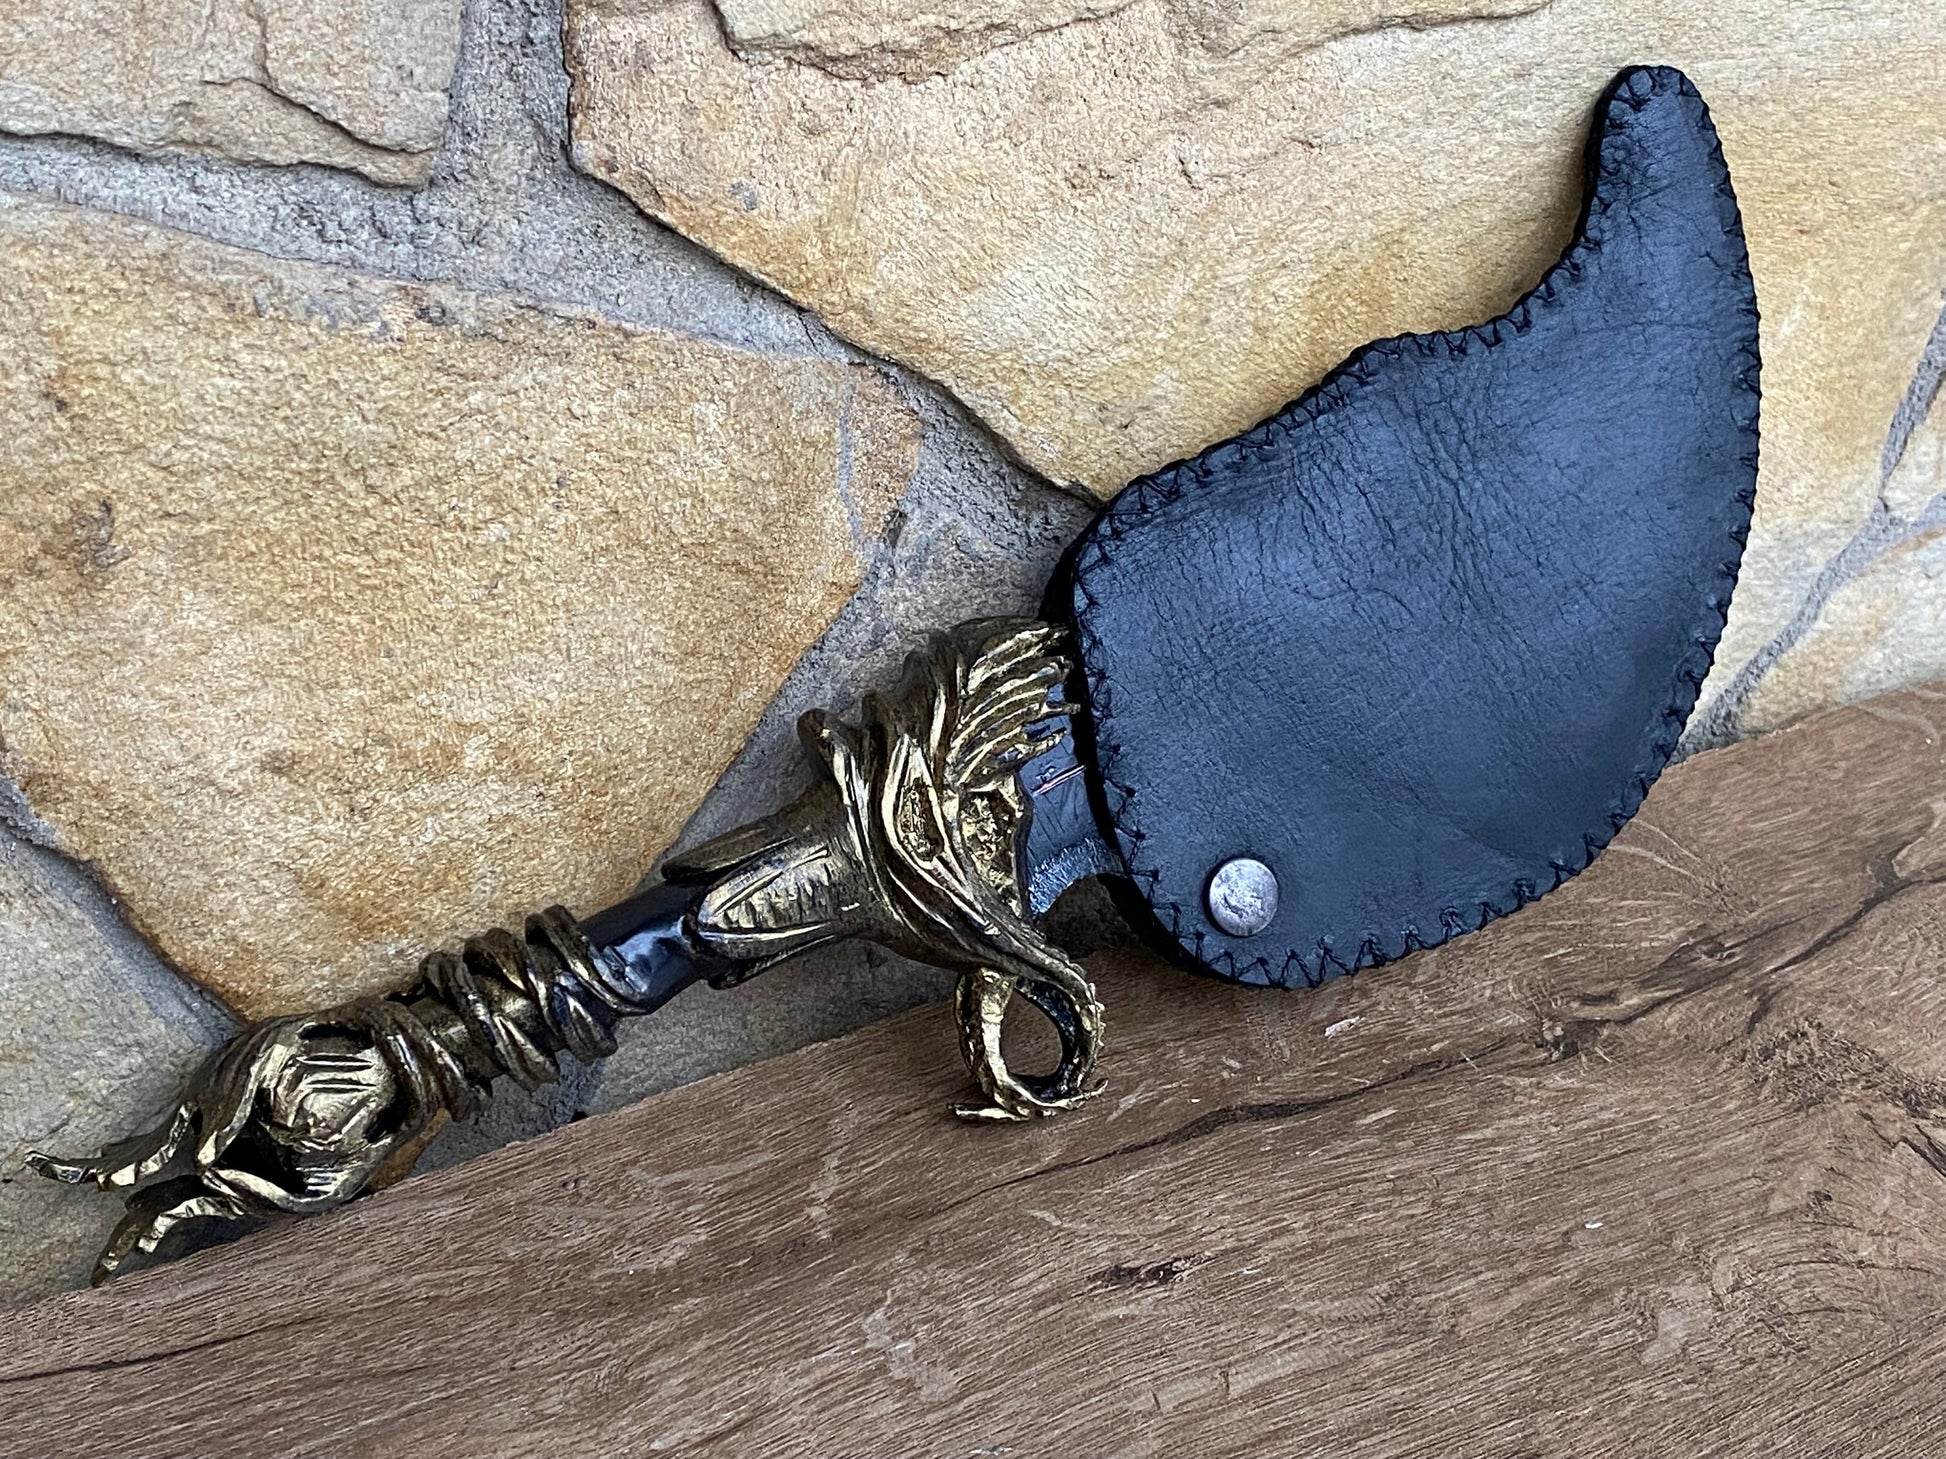 Blades of Chaos, Kratos, God of War, gamer gift, cosplay knife, Christmas, dads gift, viking axe, knife, axe, cosplay armor, cosplay weapon